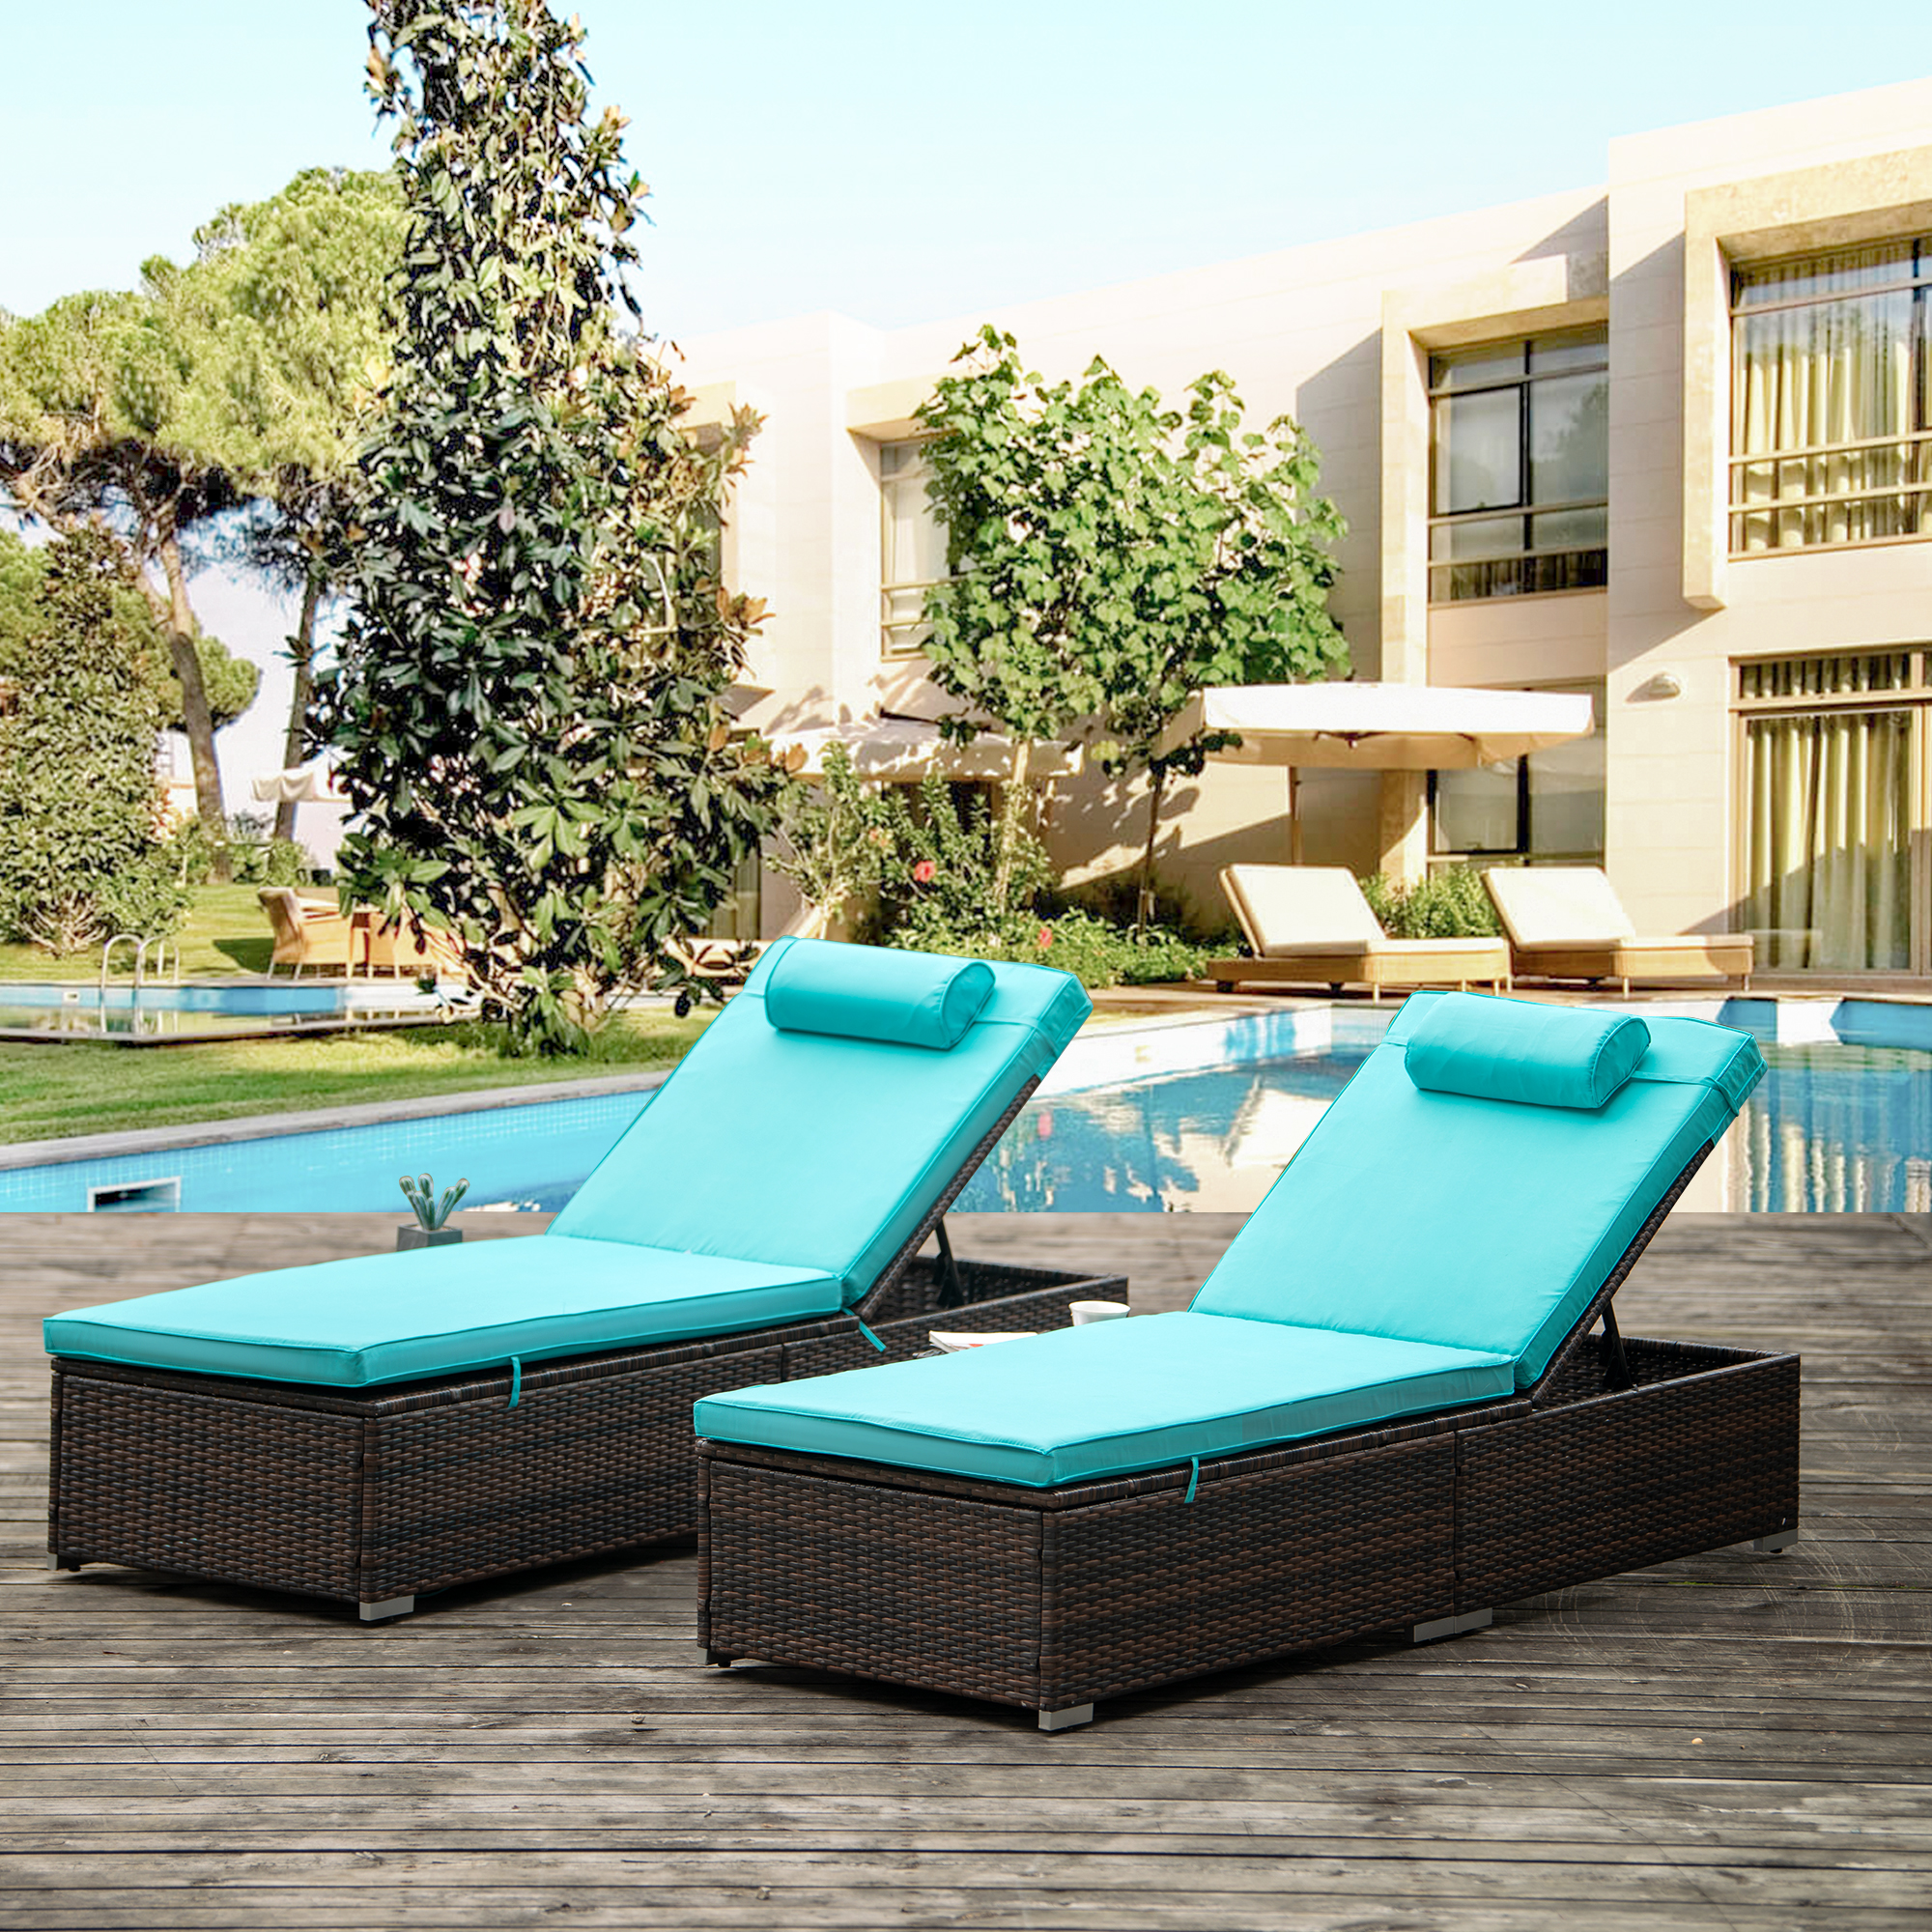 Patio Chaise Lounge 2 Sets with 5 Backrest Angles, Outdoor Single Adjustable Patio Wicker Lounge Chair with side Storage Shelf for Poolside Backyard Deck Porch Garden - image 2 of 7